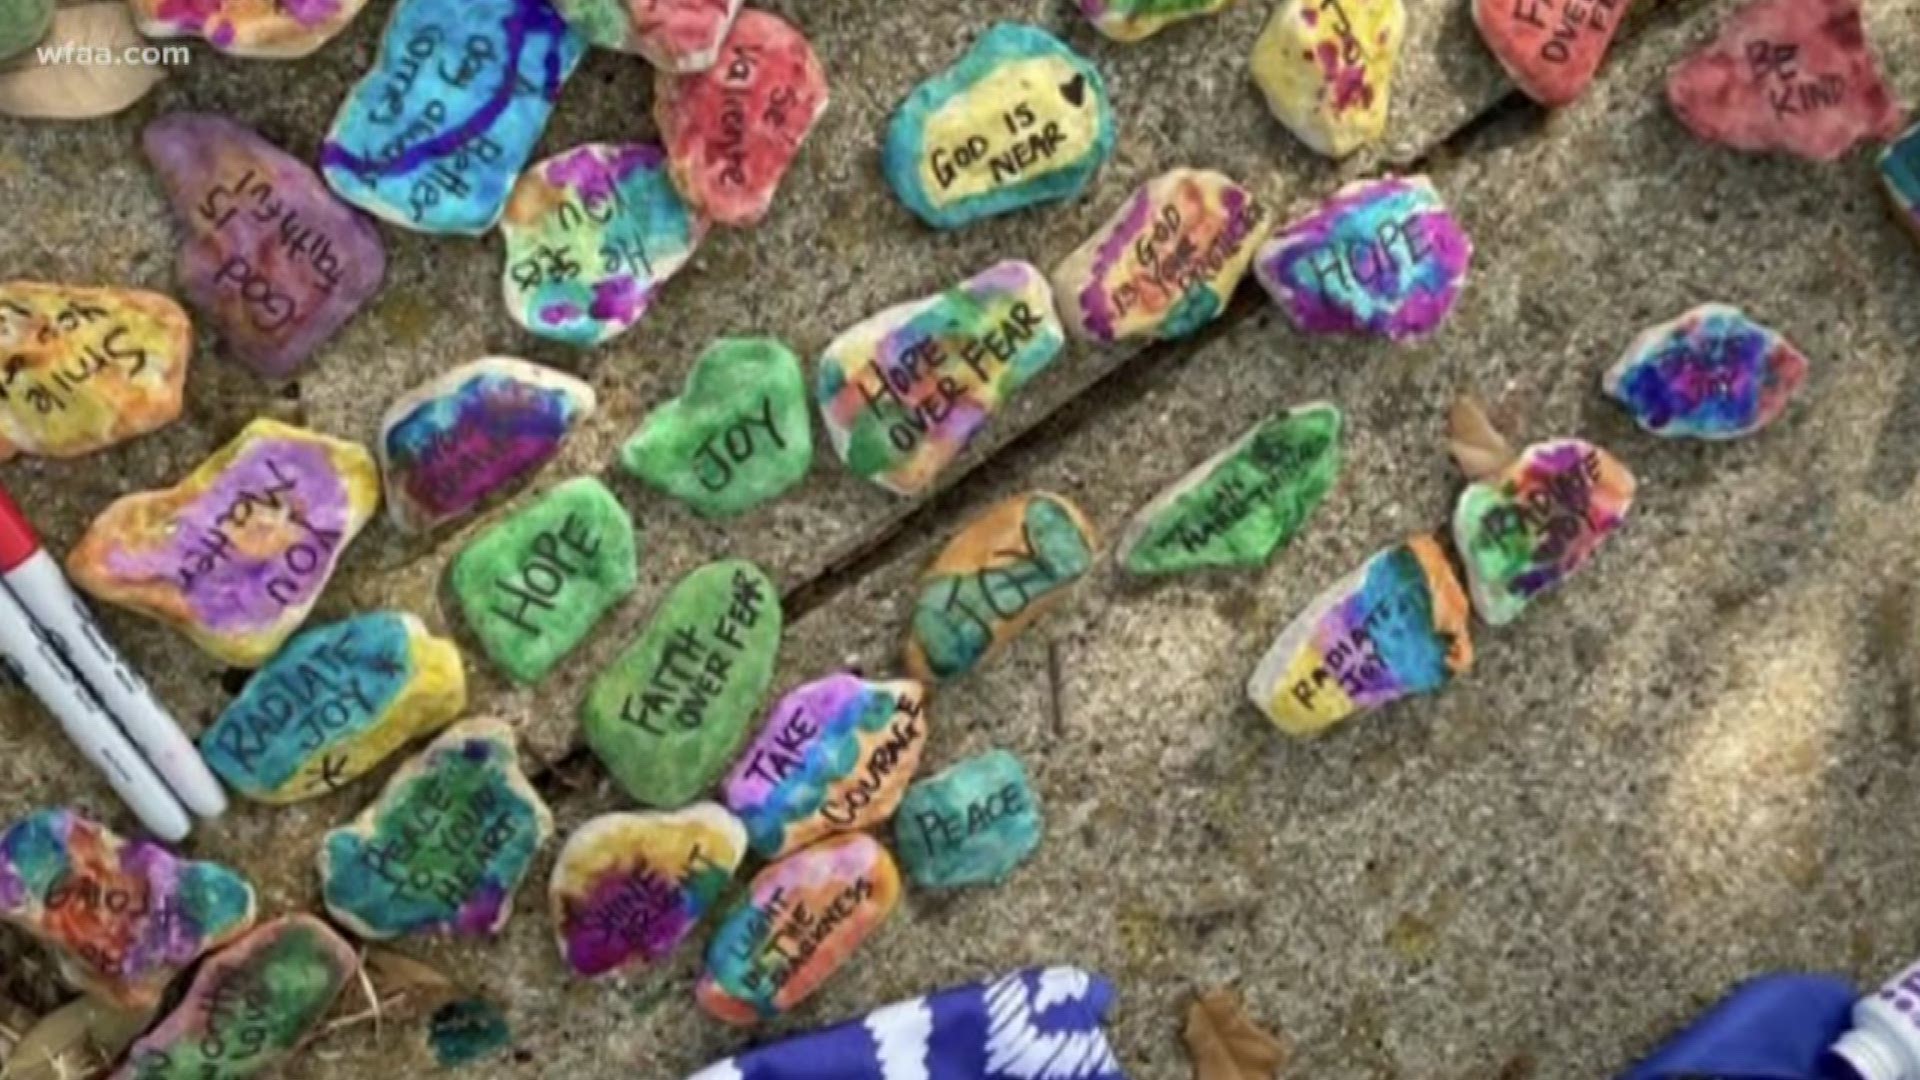 The Gonzalez family in Lake Highlands, Dallas painted 75 rocks with messages of hope and placed them around the neighborhood.